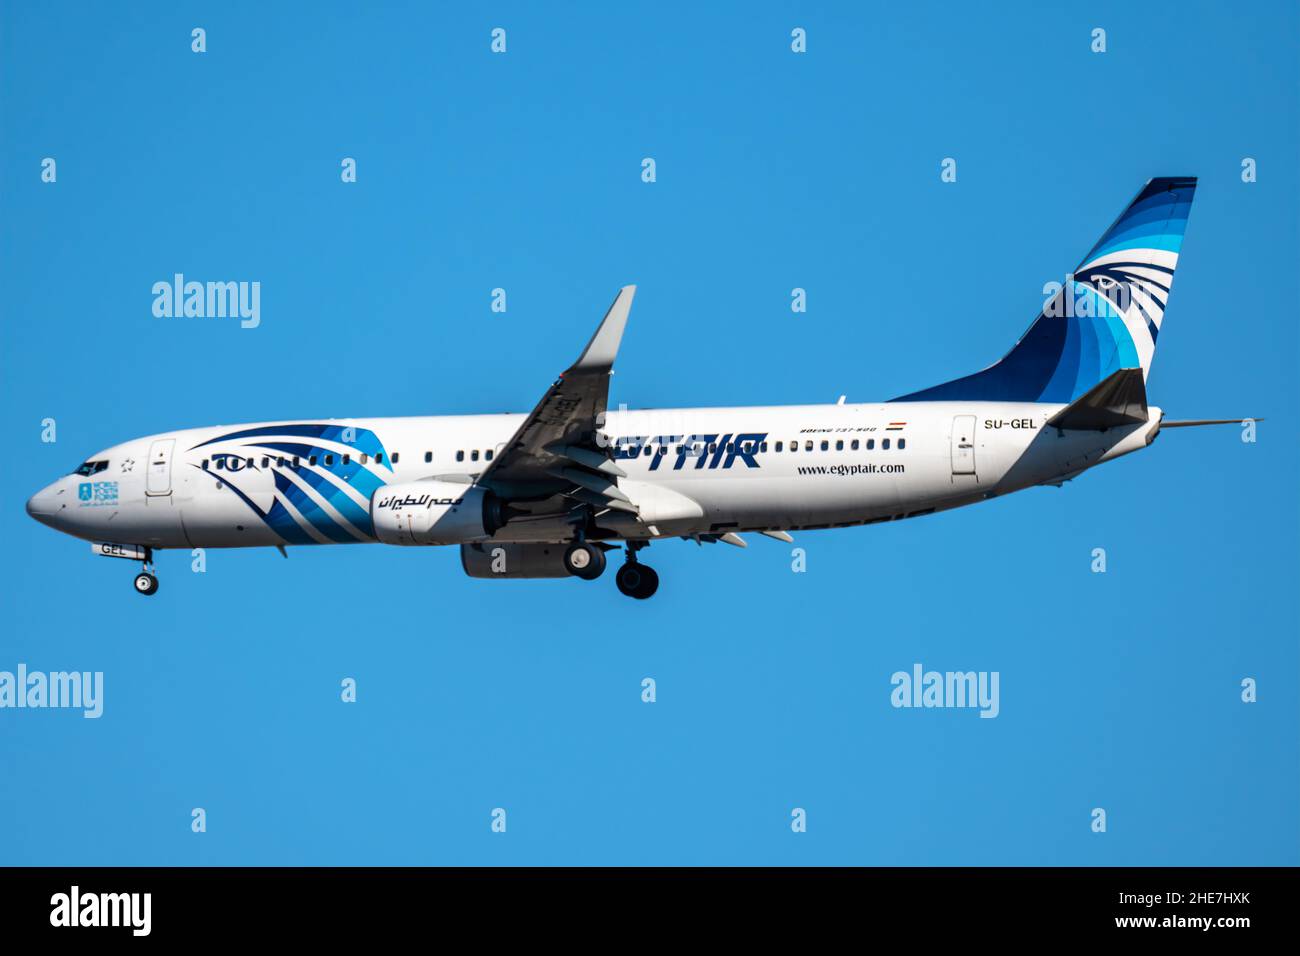 Madrid, Spain - December 31, 2021: Boeing 737-800 passenger aircraft of the airline Egyptair flying before landing against the clear blue sky. Stock Photo